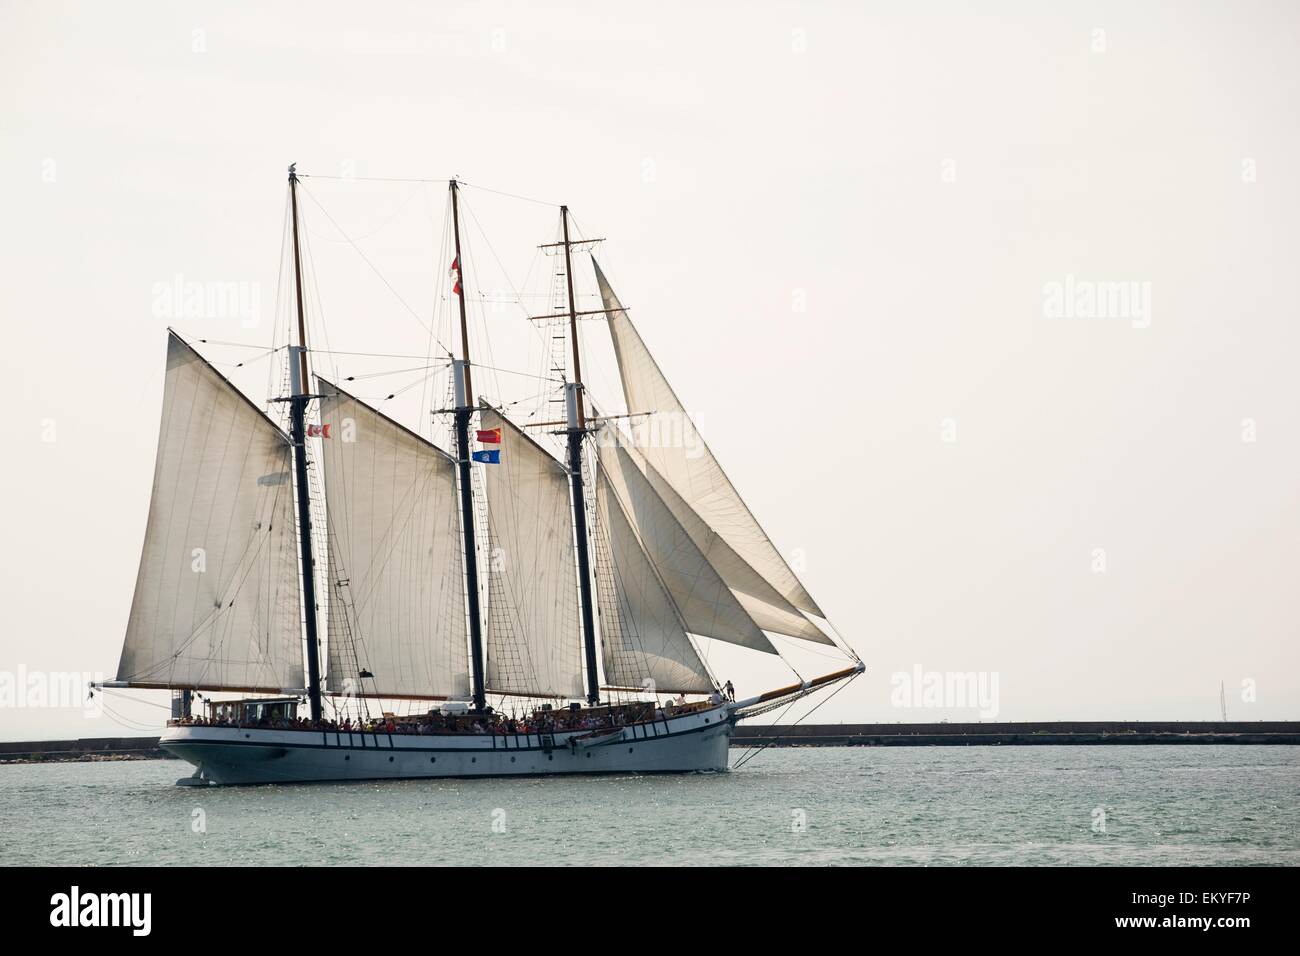 Tall Ship With Sails; Port Colborne, Ontario, Canada Stock Photo